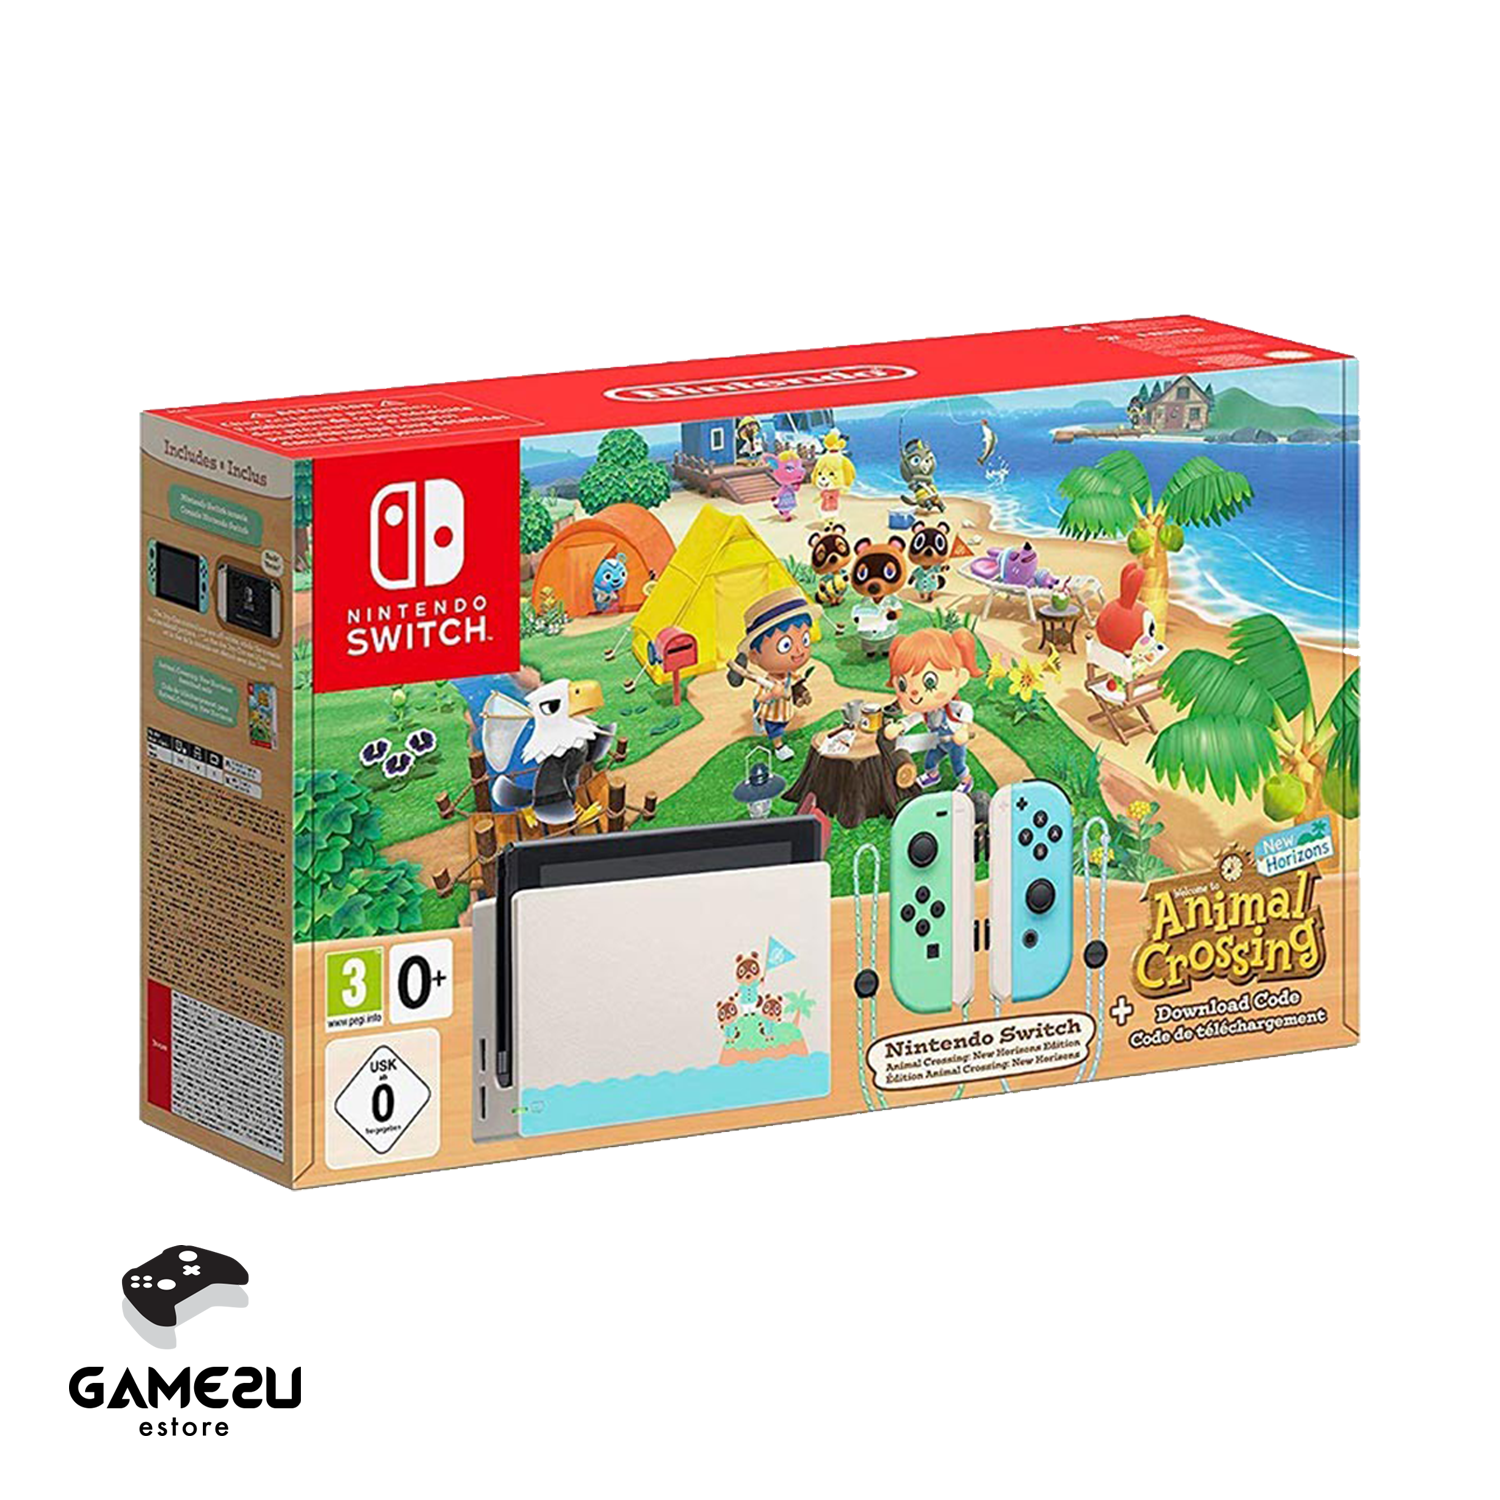 special edition animal crossing nintendo switch